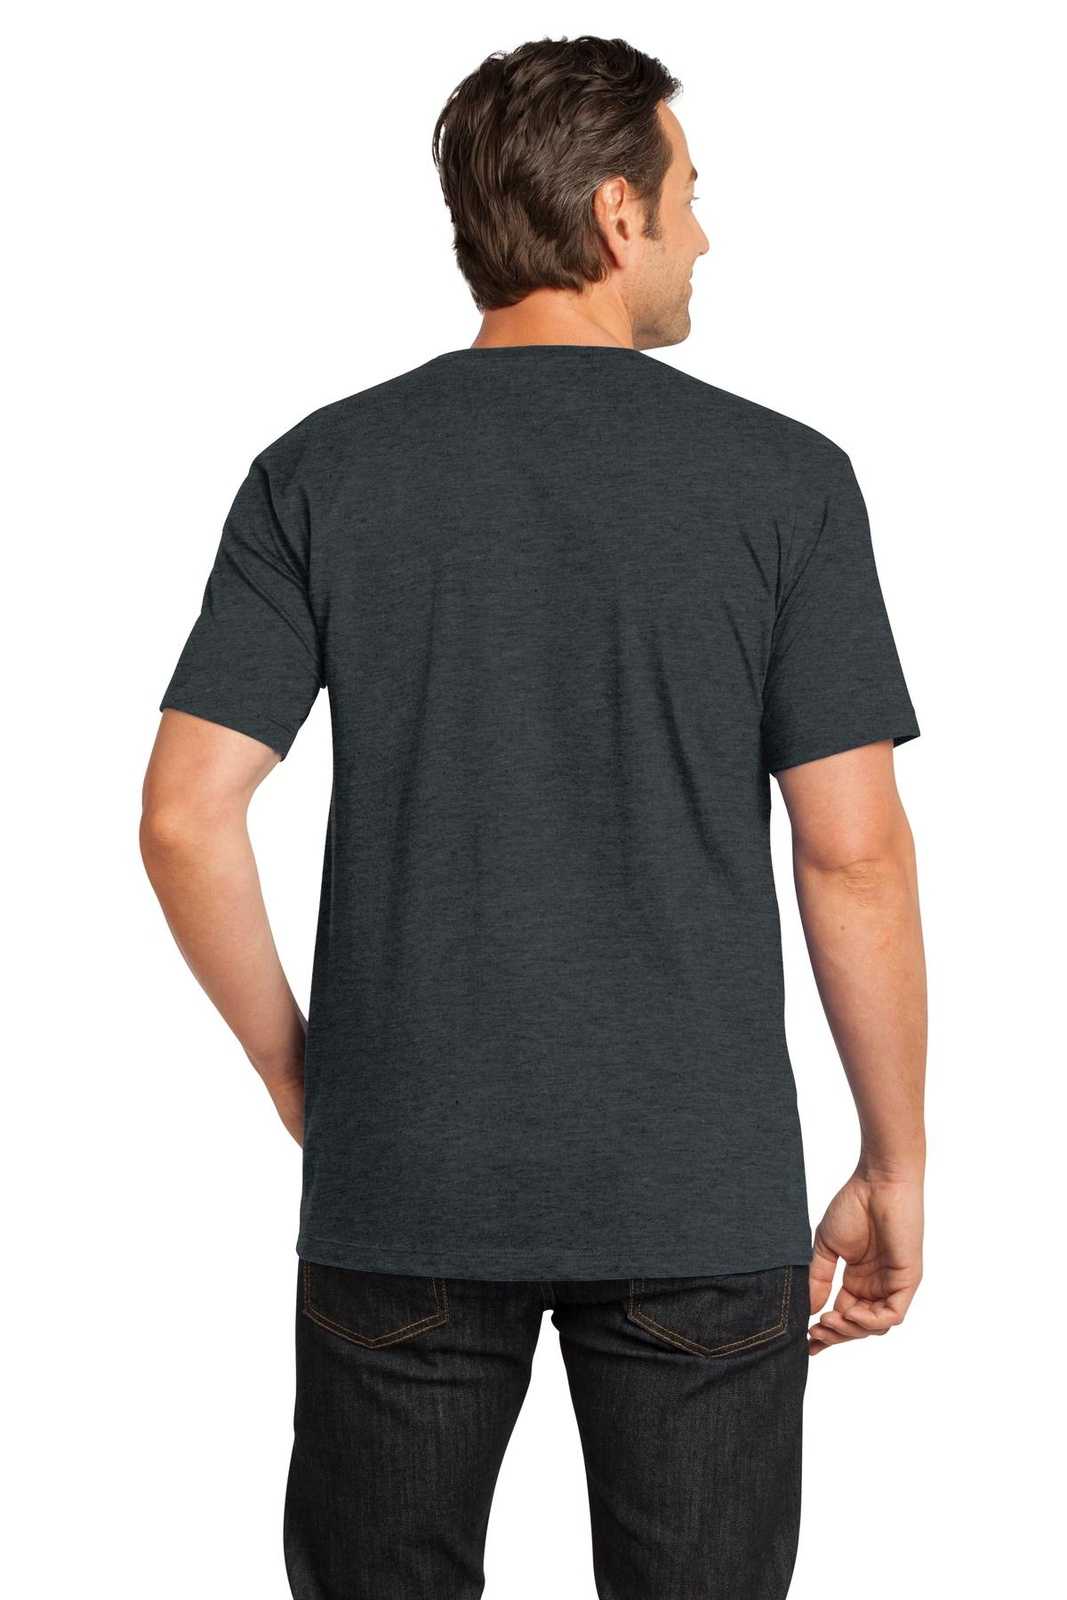 District DT104 Perfect Weight Tee - Heathered Charcoal - HIT a Double - 2